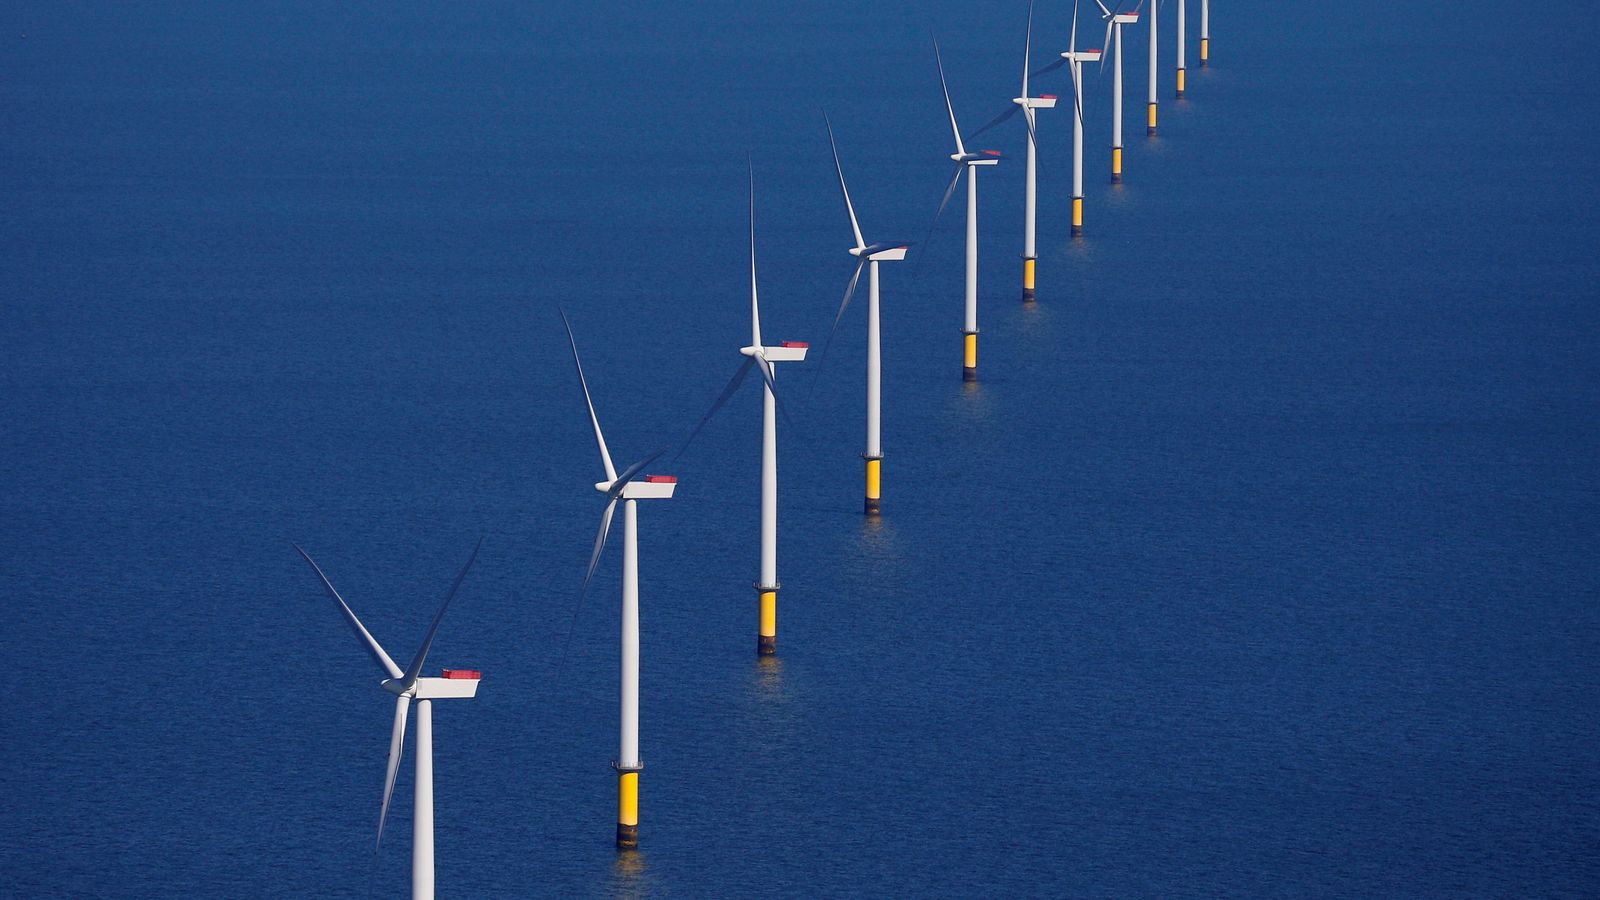 World's largest offshore wind developer Orsted cuts back production targets as costs mount